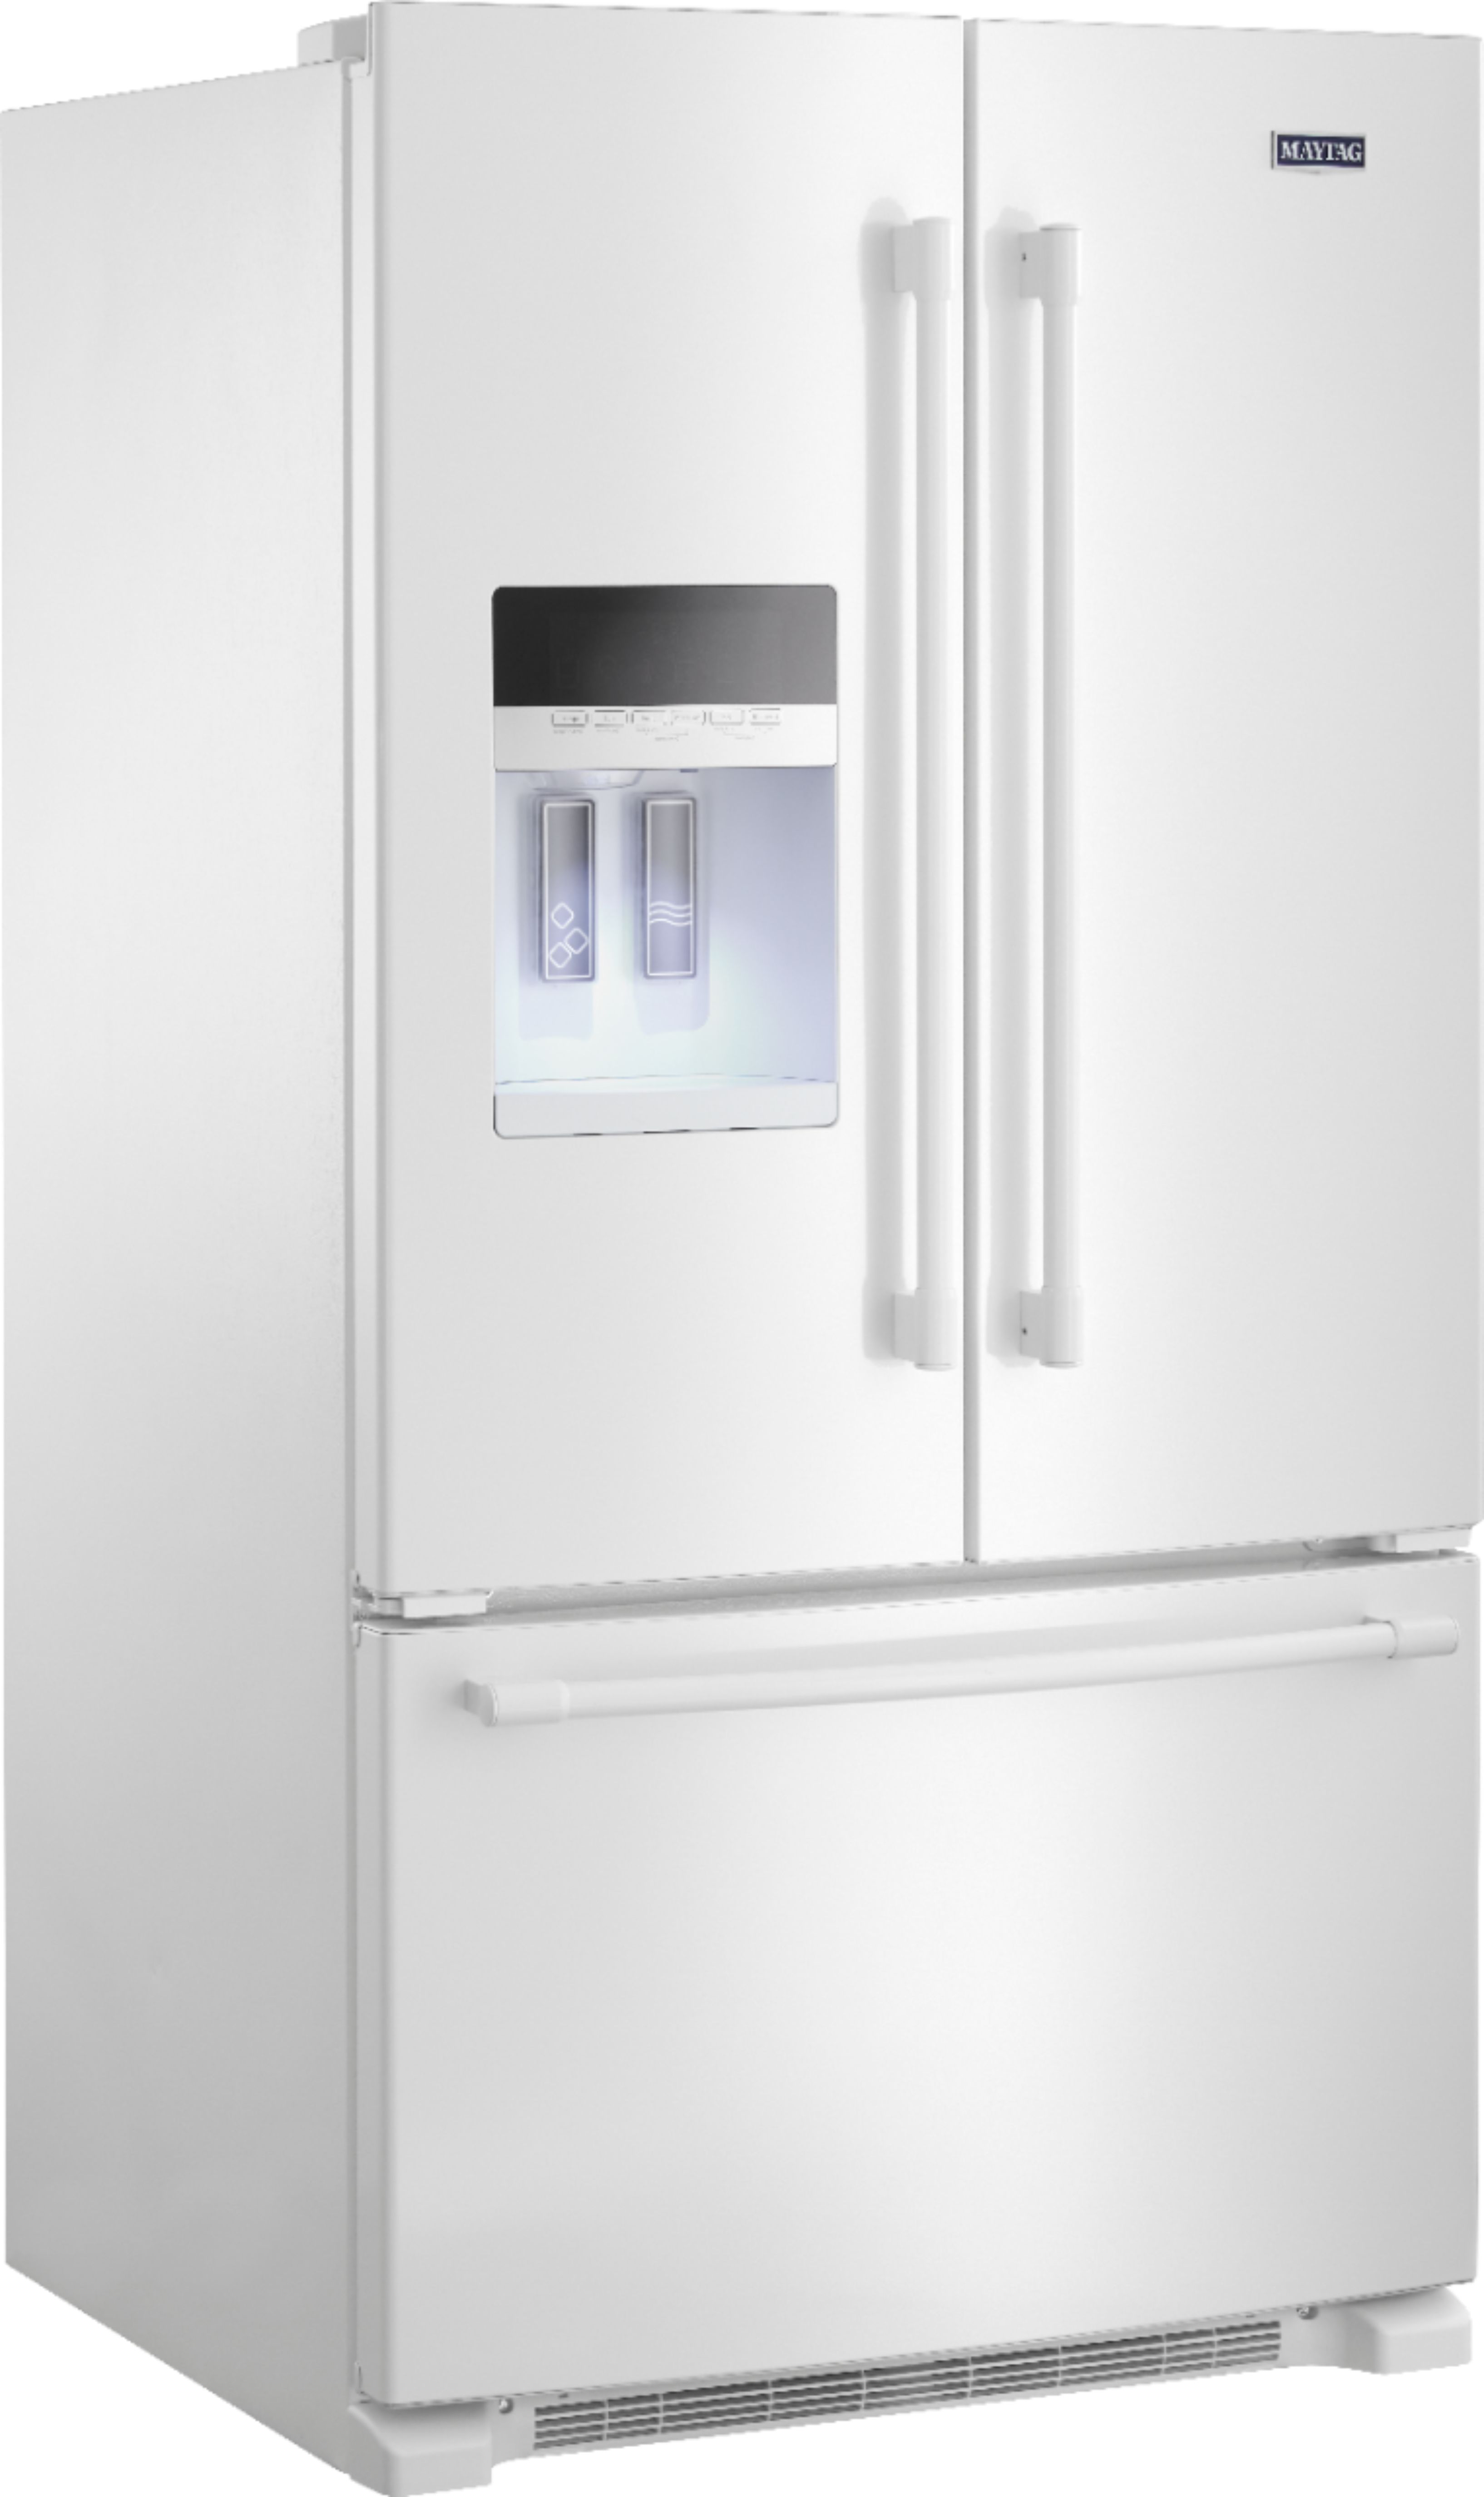 French Doors and Hinged Patio Doors Lg French Door Refrigerator Ice Maker Not Dumping Ice